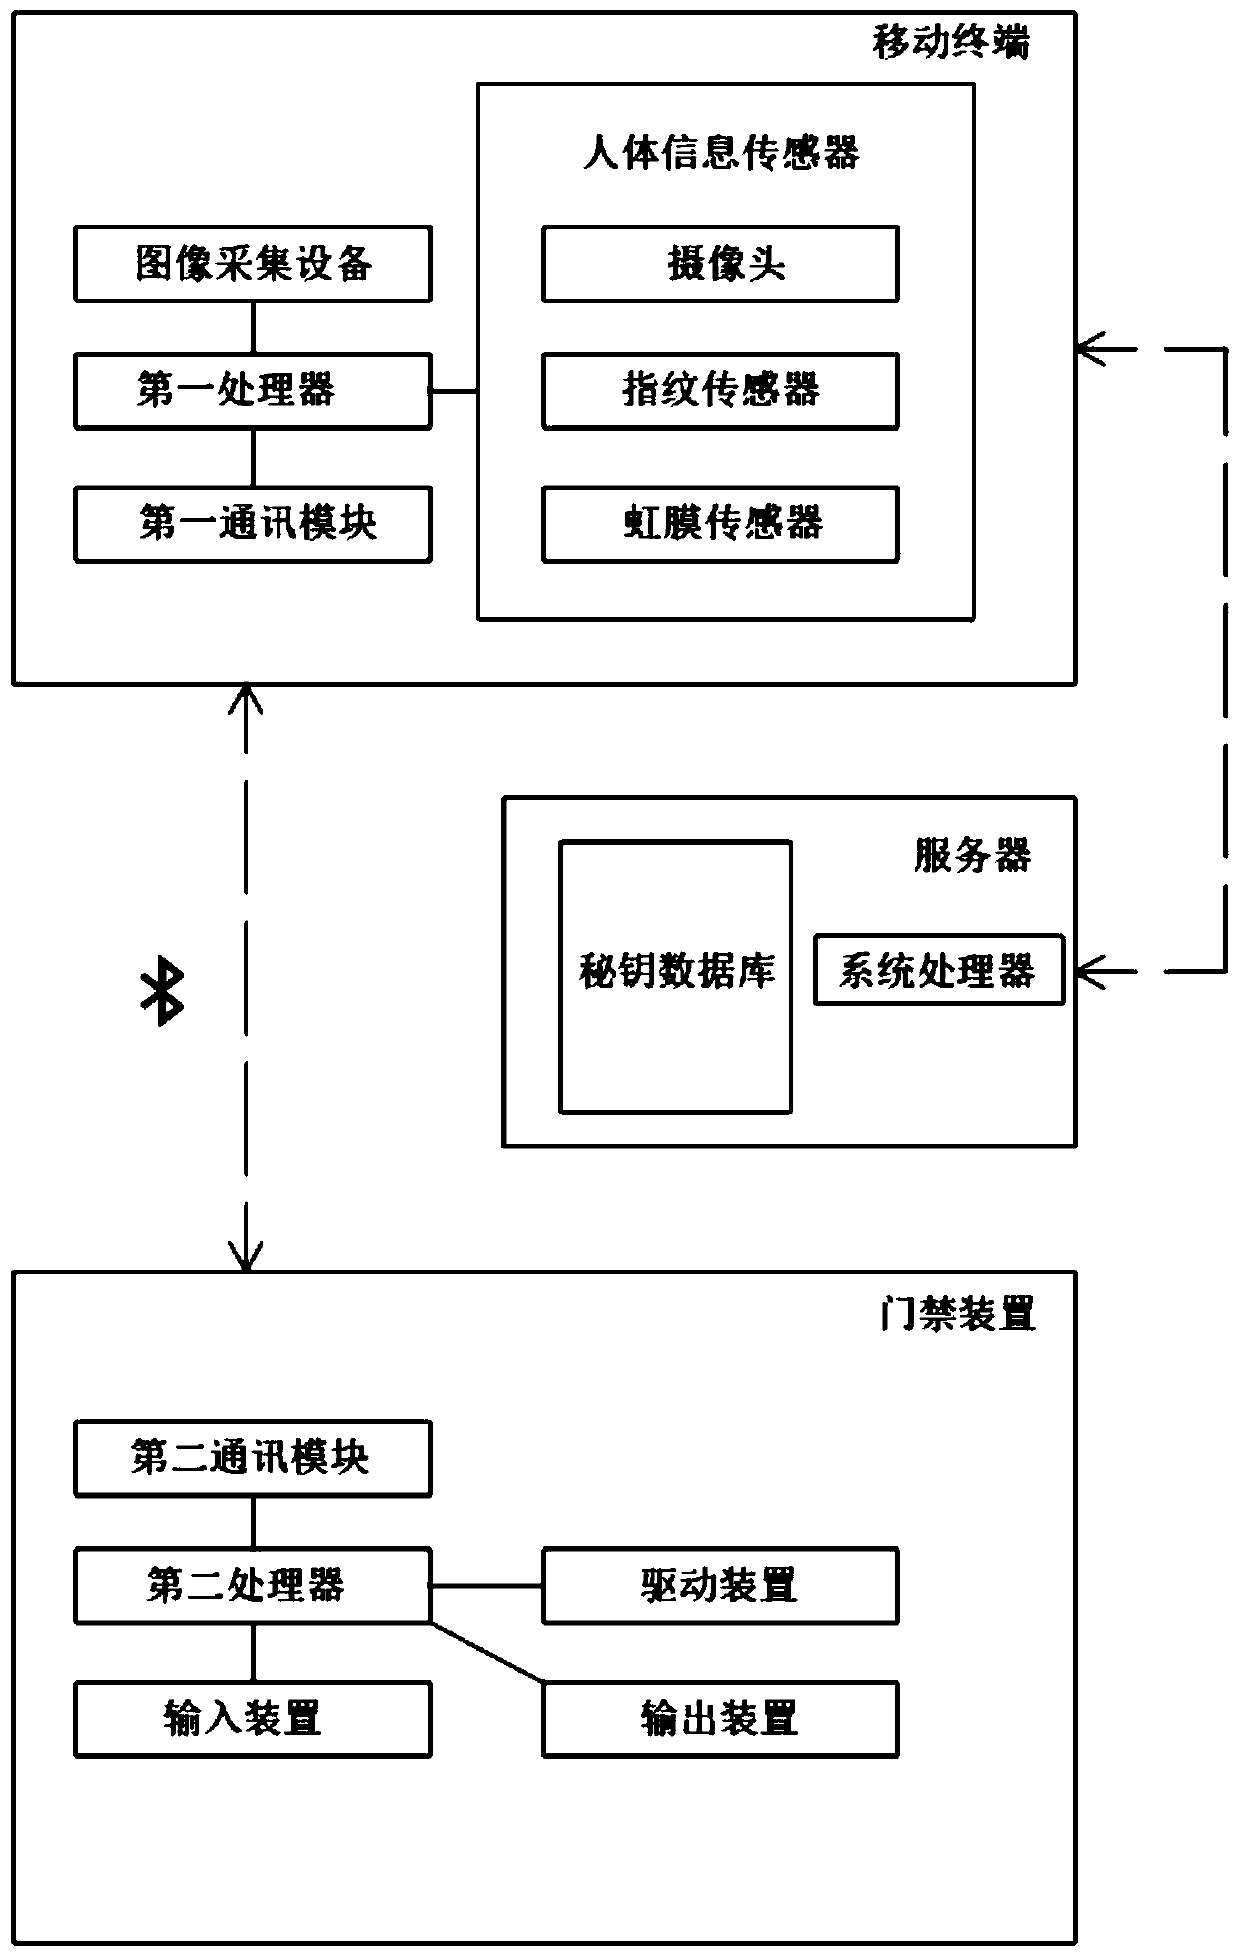 Access control management method based on wireless communication network